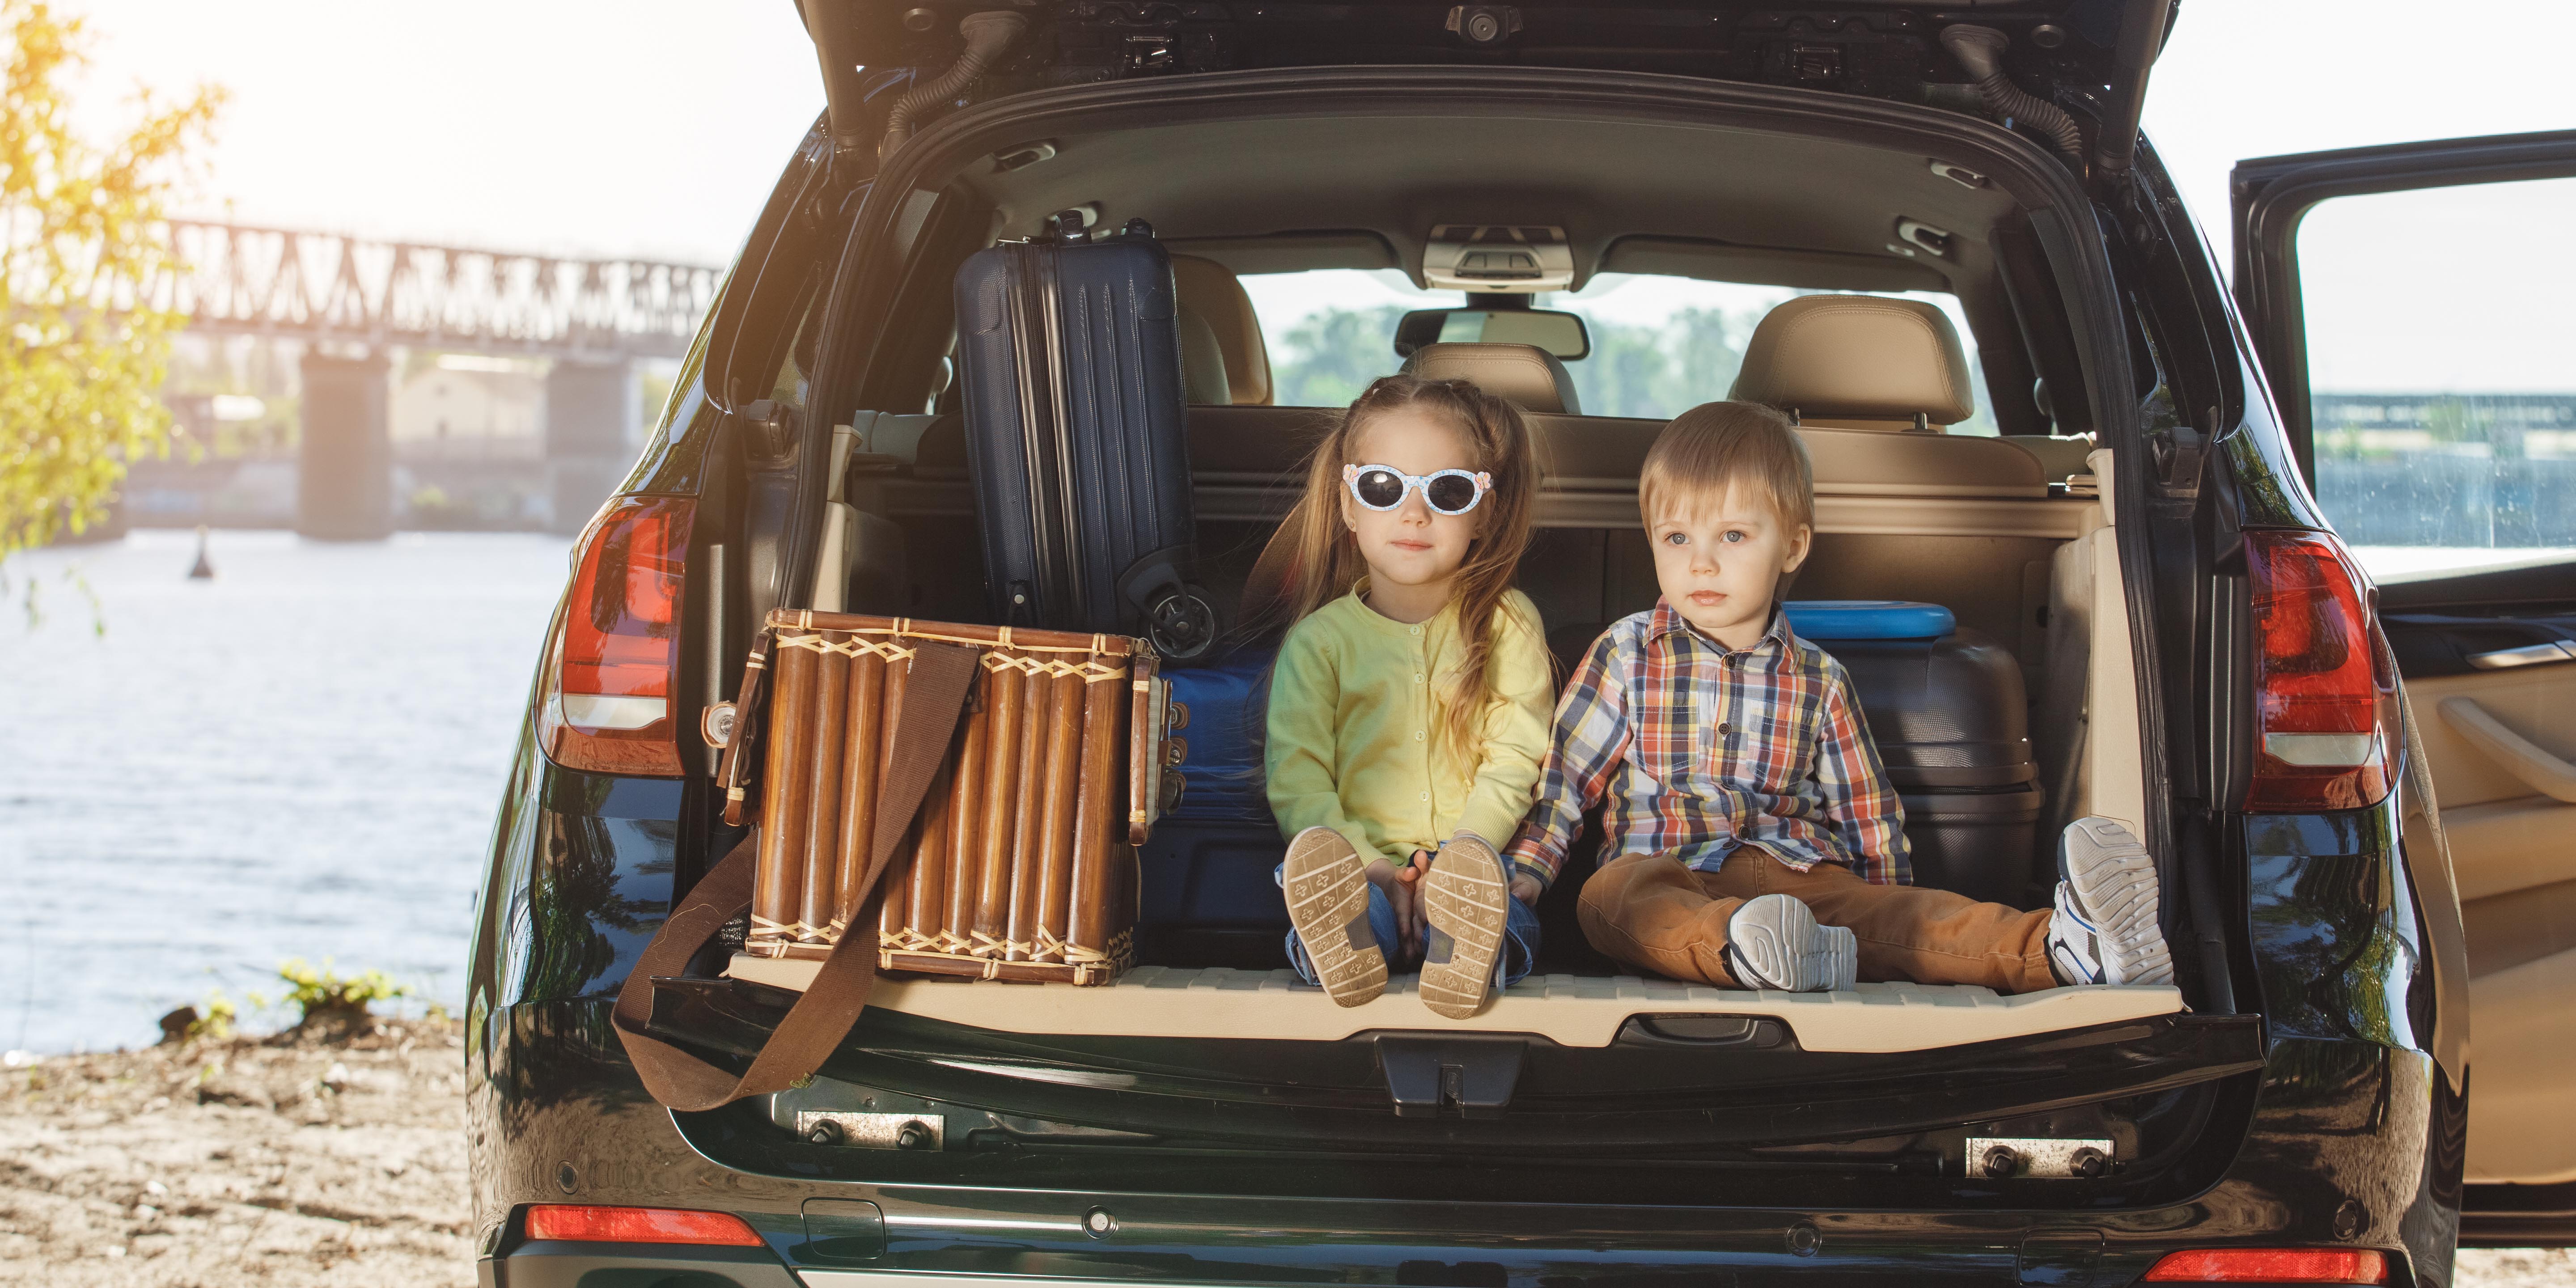 Essentials to pack when road tripping with kids